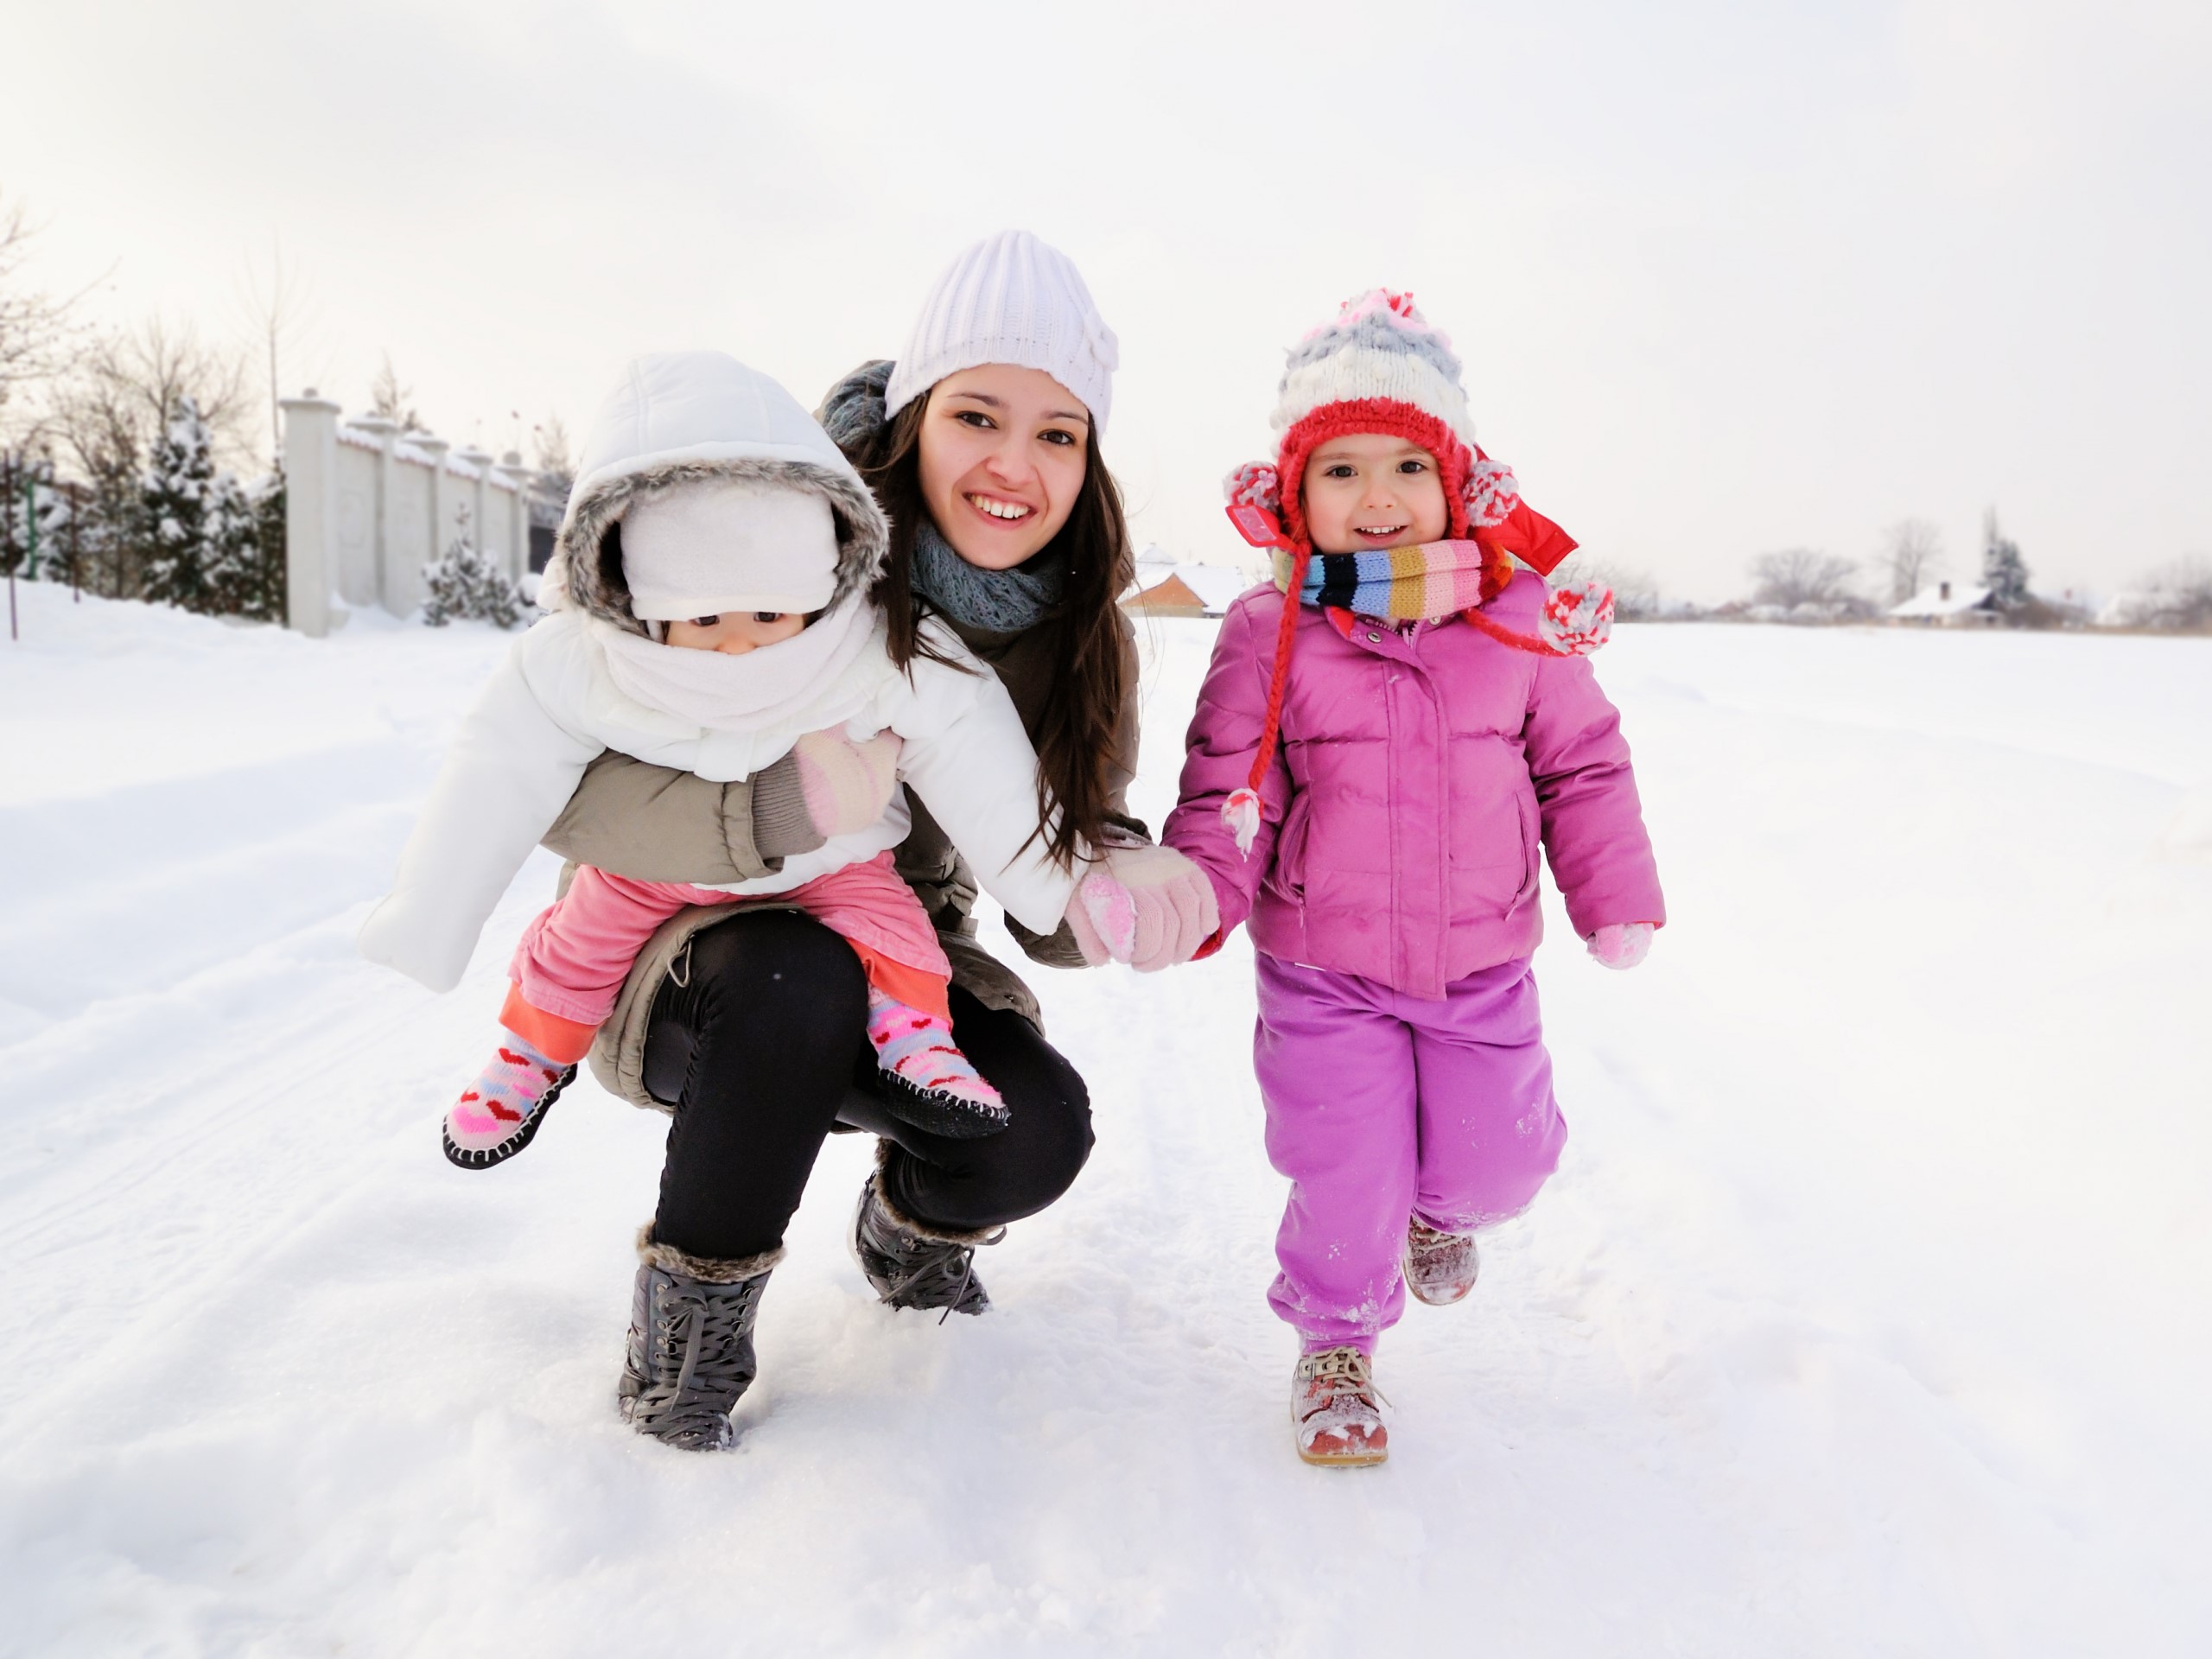 The Cold Weather Gear You Need for the Whole Family This Winter